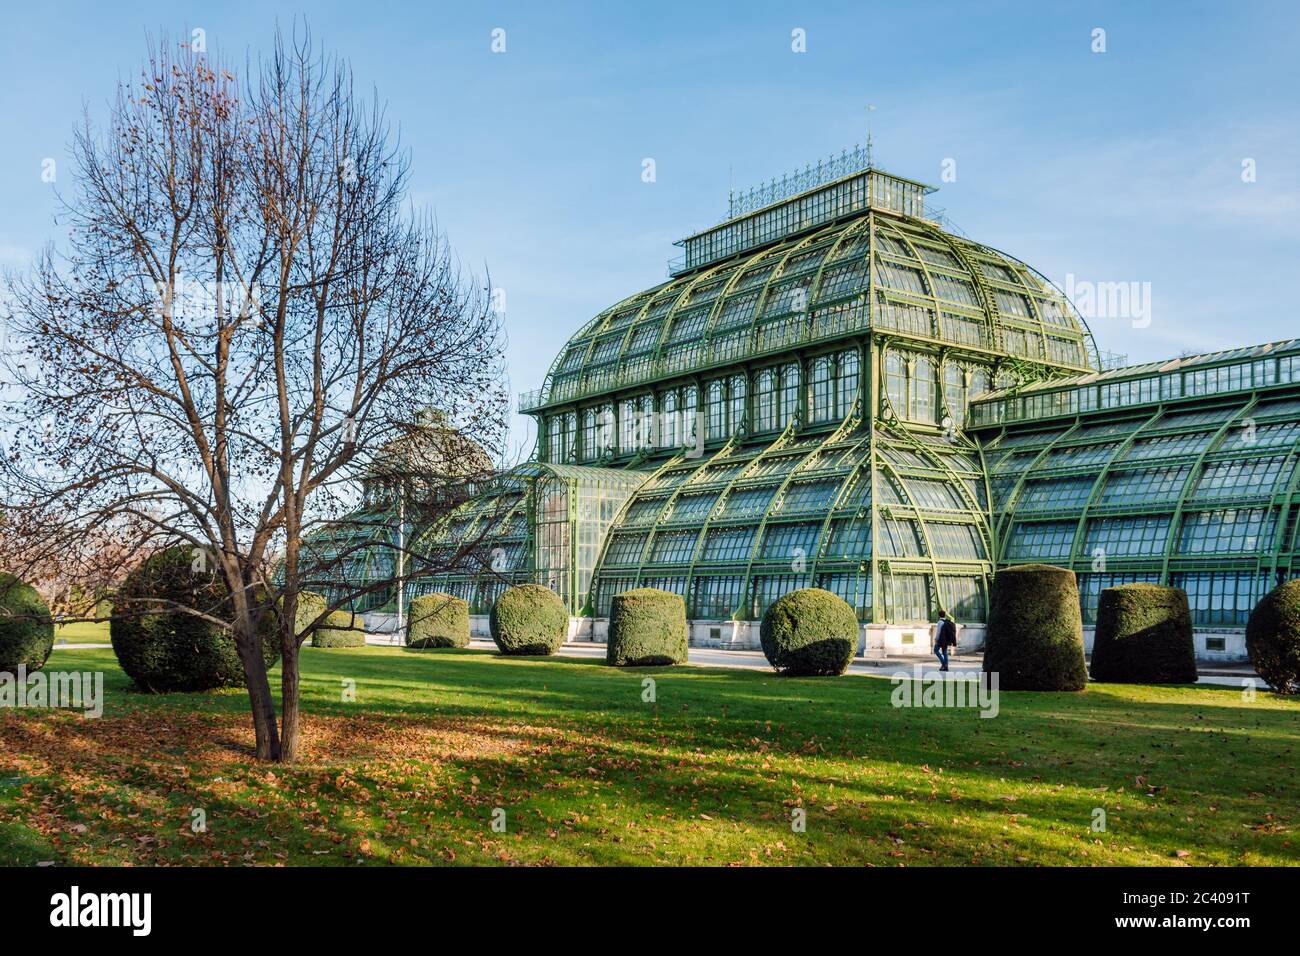 The Palmenhaus ( Palm house ) Schonbrunn is a large greenhouse in Vienna, Austria, featuring plants from around the world. It was opened in 1882. Stock Photo